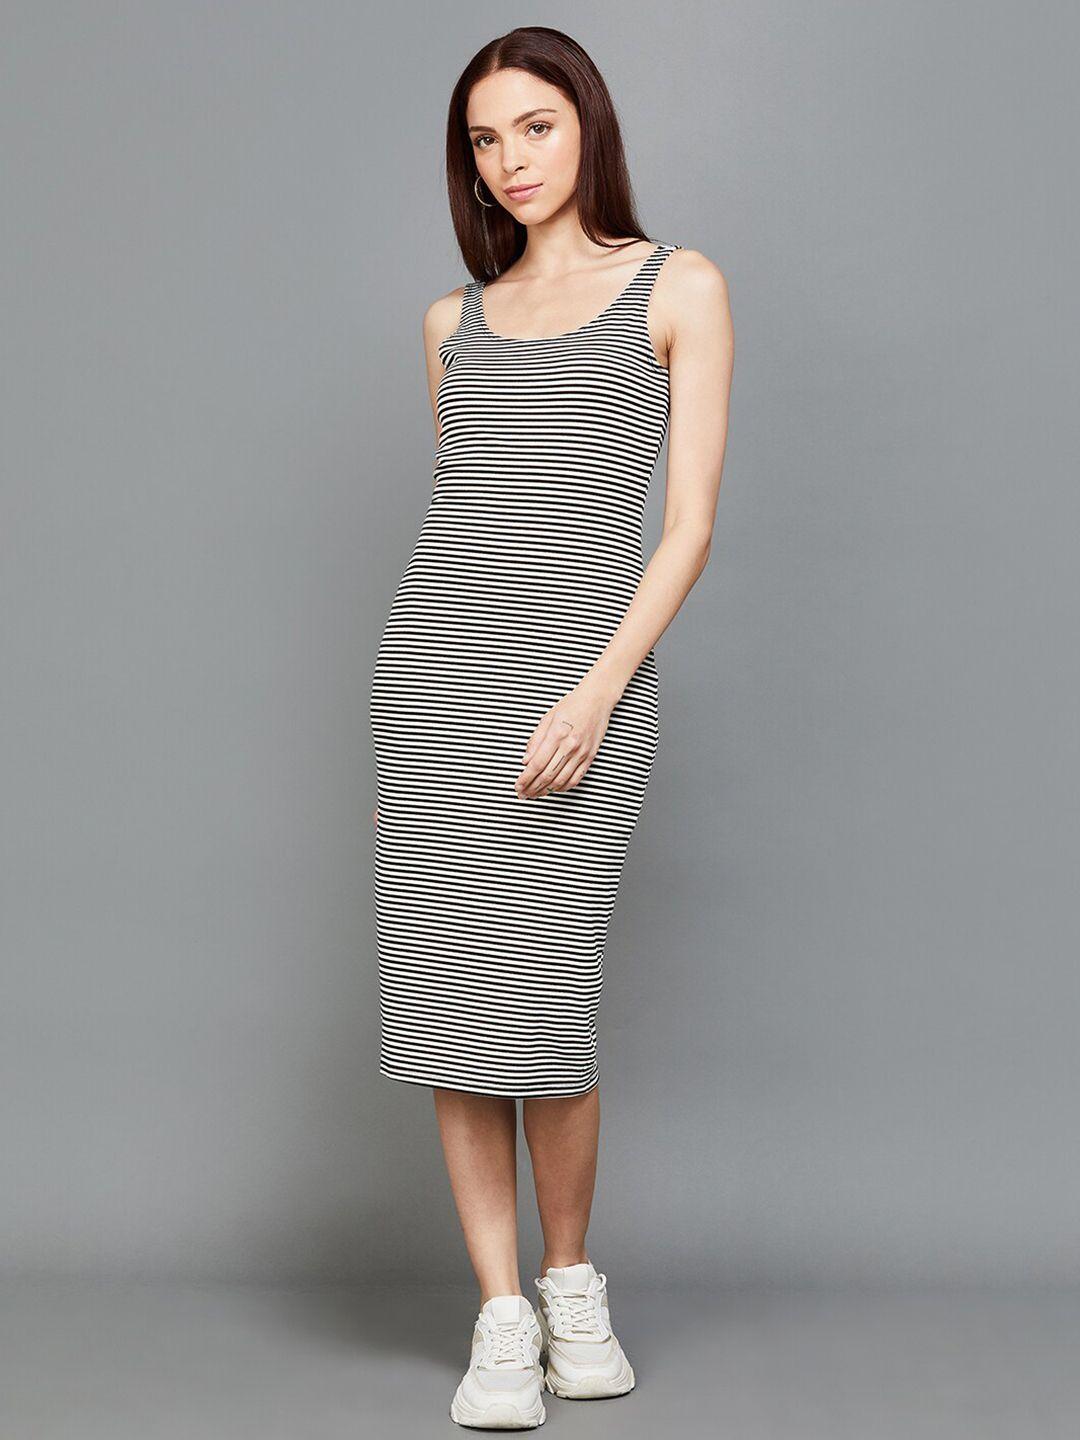 ginger-by-lifestyle-striped-sleveeless-bodycon-midi-dress